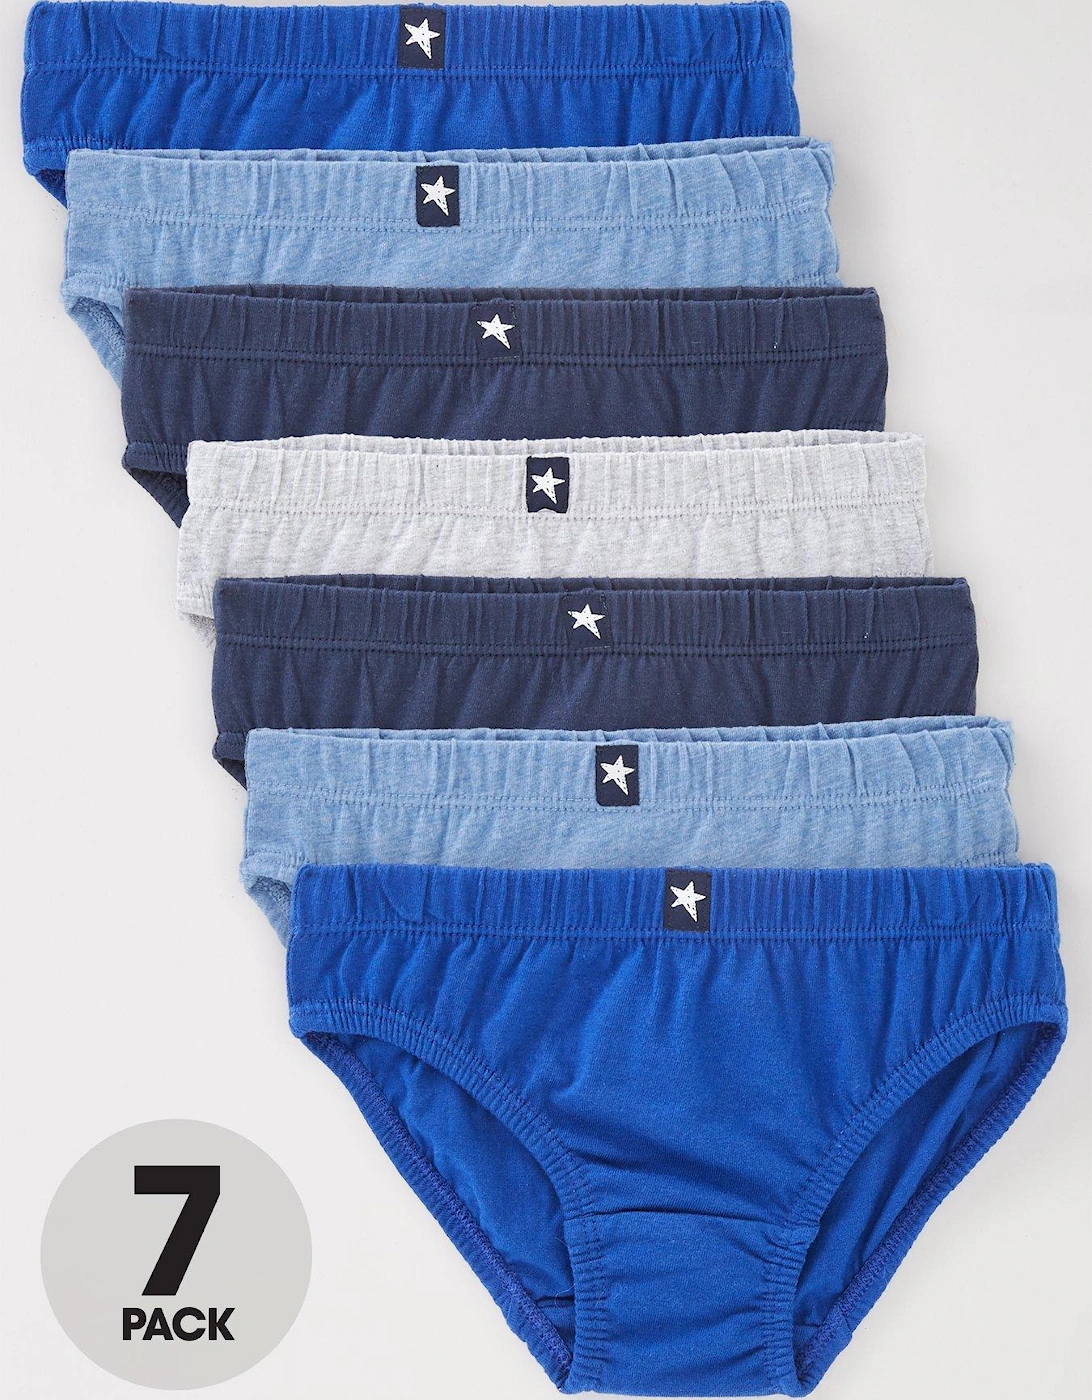 Boys 7 Pack Briefs - Blue, 4 of 3